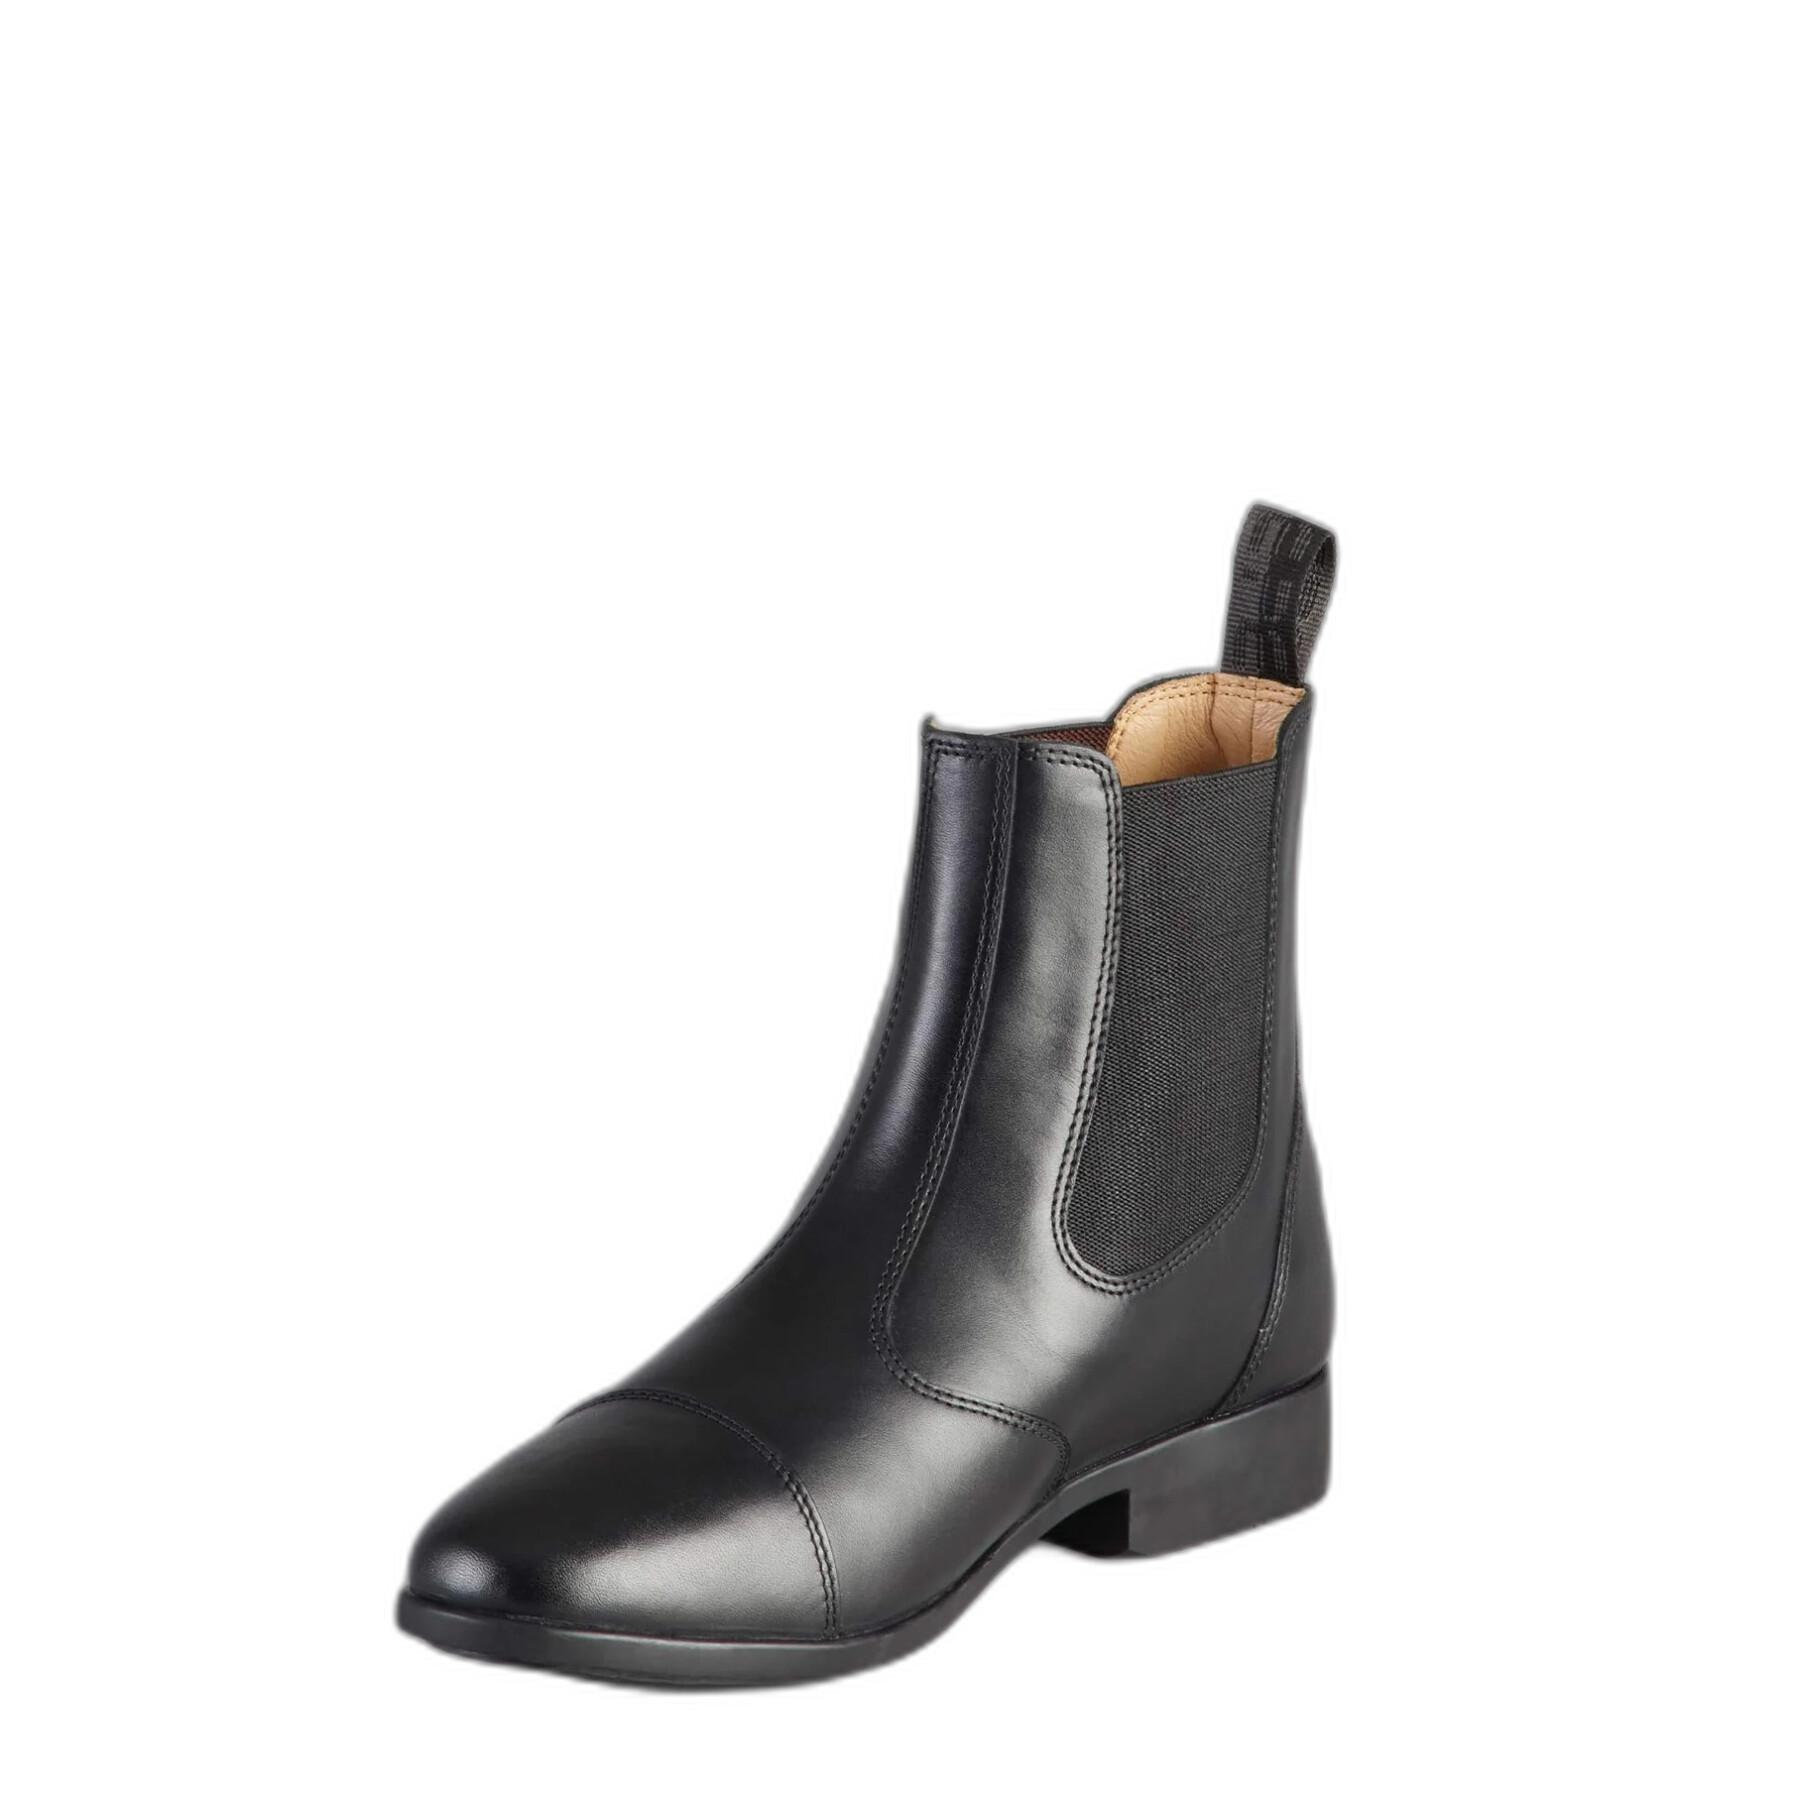 Boots leather chelsea riding boots Premier Equine Torlano